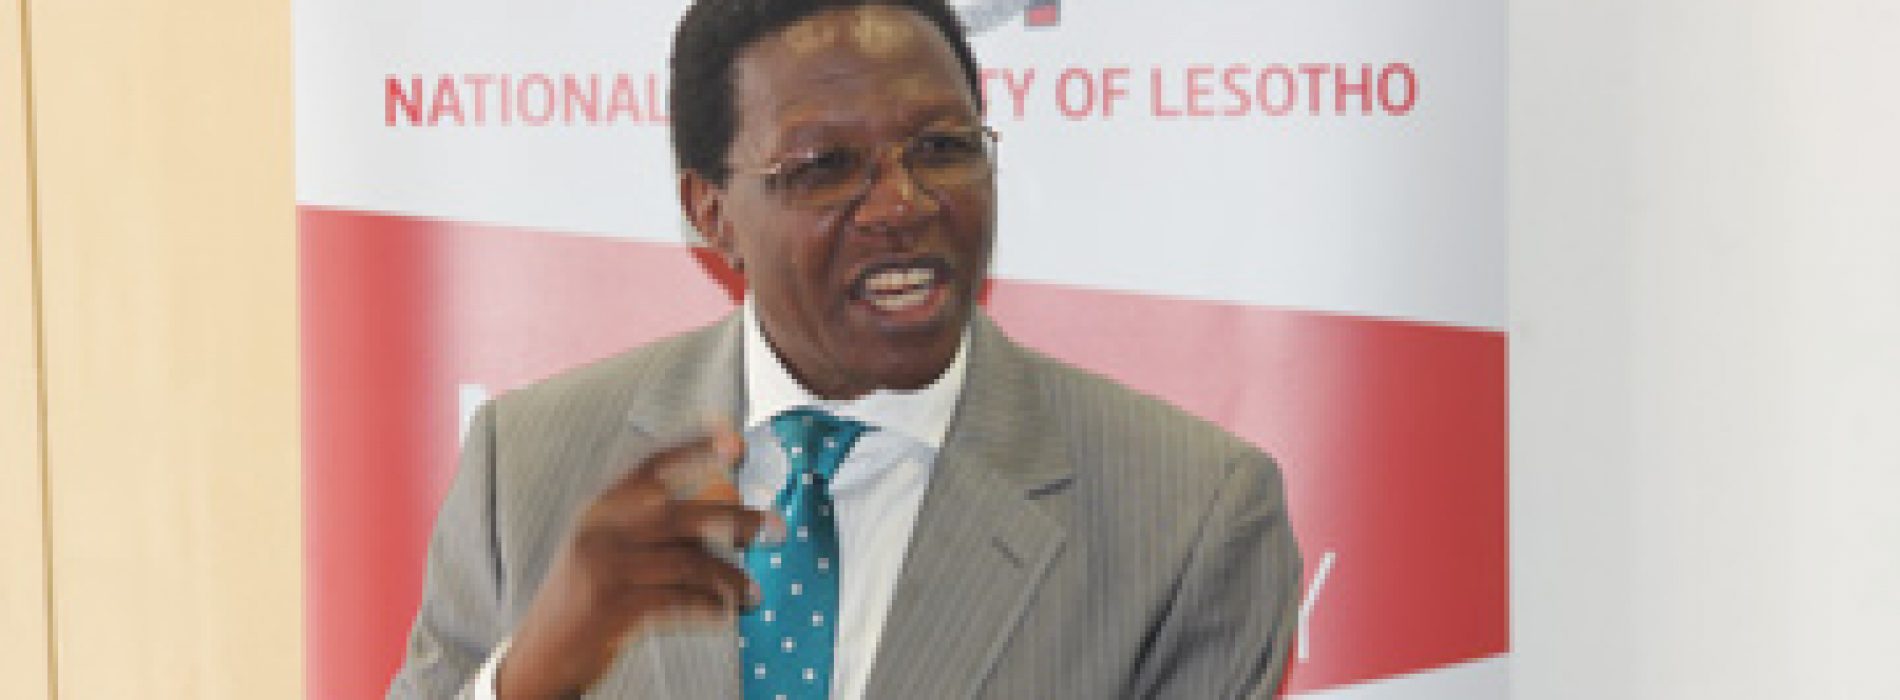 Resignations at NUL: Setting the record straight